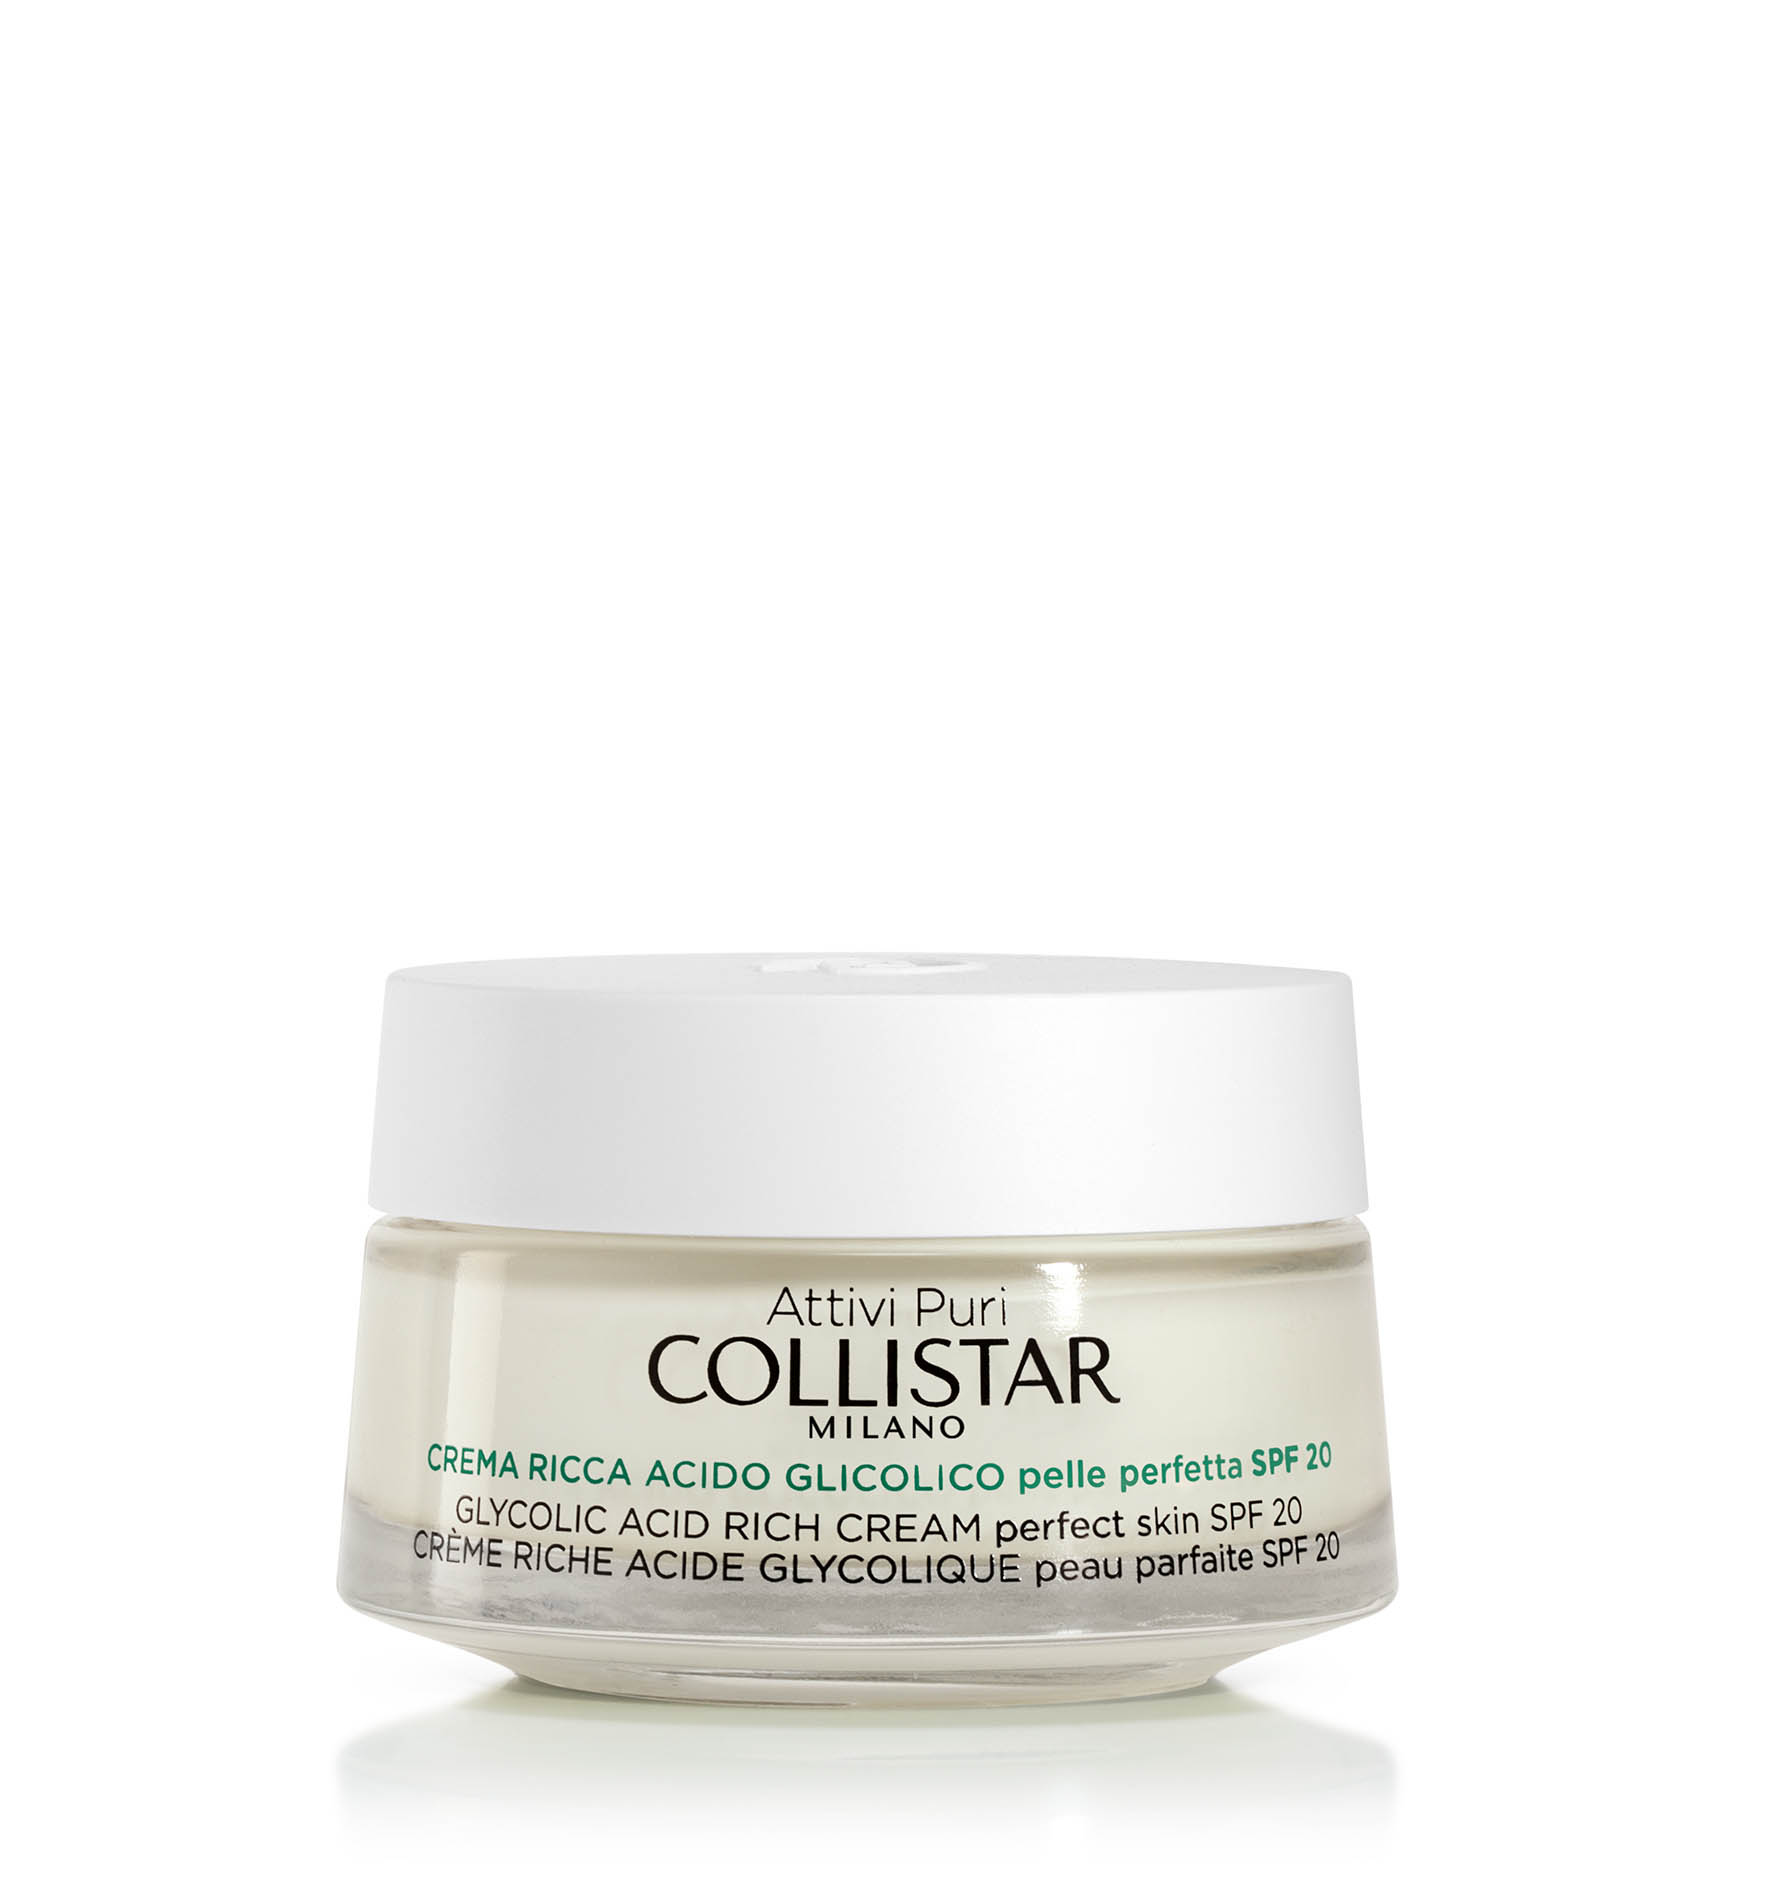 GLYCOLIC ACID RICH CREAM - Dull skin and discolouration | Collistar - Shop Online Ufficiale